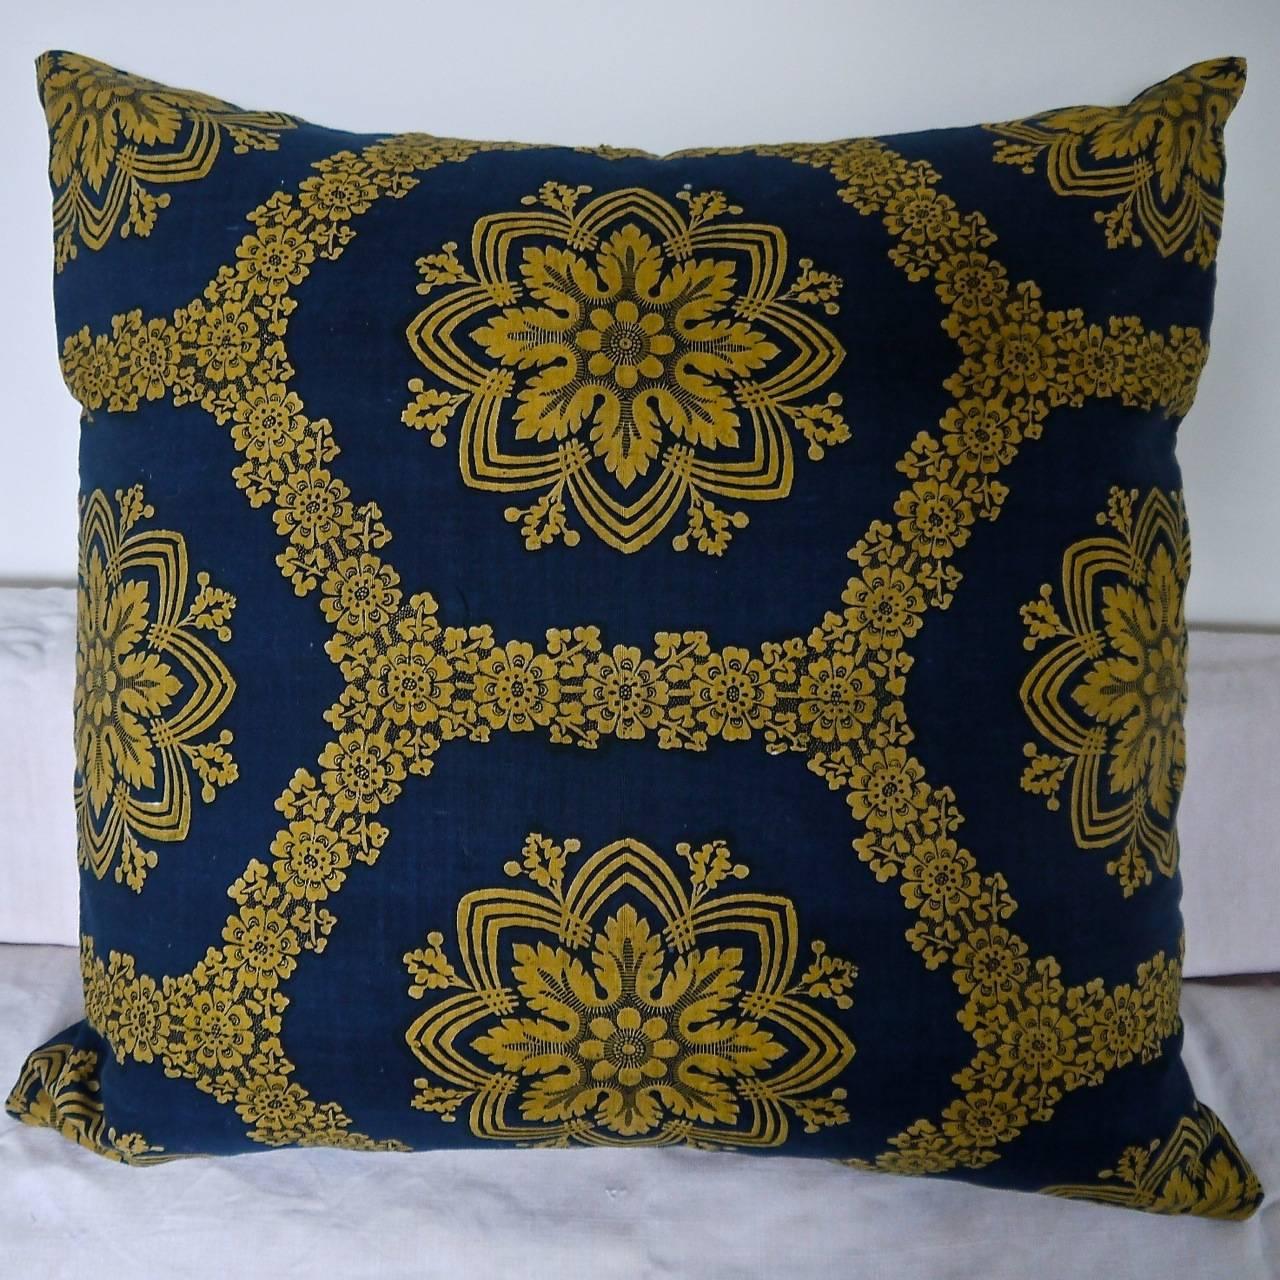 Early 19th century French Empire block printed in a strong saffron yellow and indigo resist cotton cushion. Unusual large-scale design
Backed in a natural indigo hand dyed 19th century French linen and slipstitched closed with a duck feather